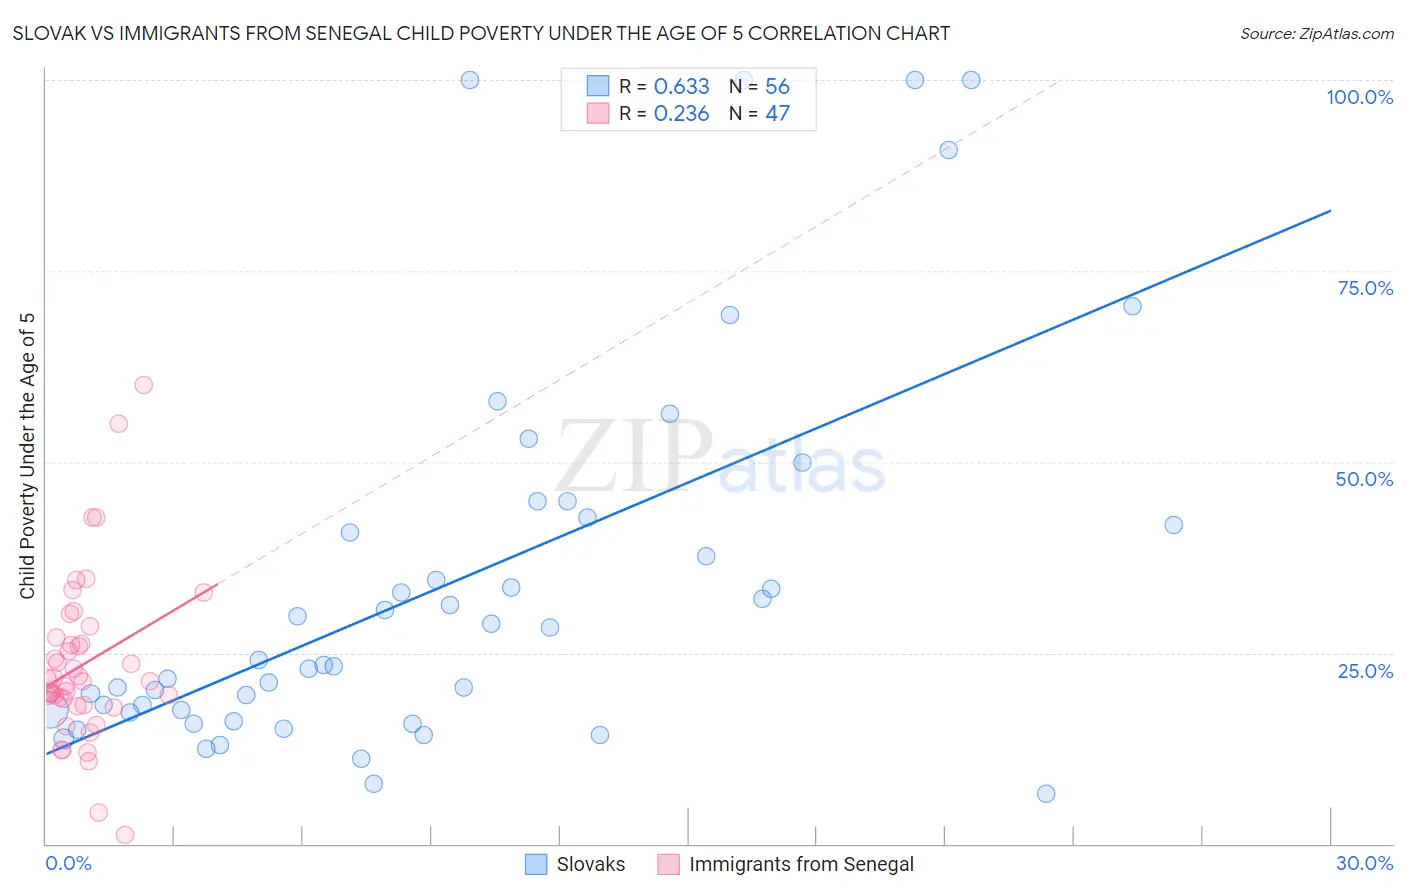 Slovak vs Immigrants from Senegal Child Poverty Under the Age of 5